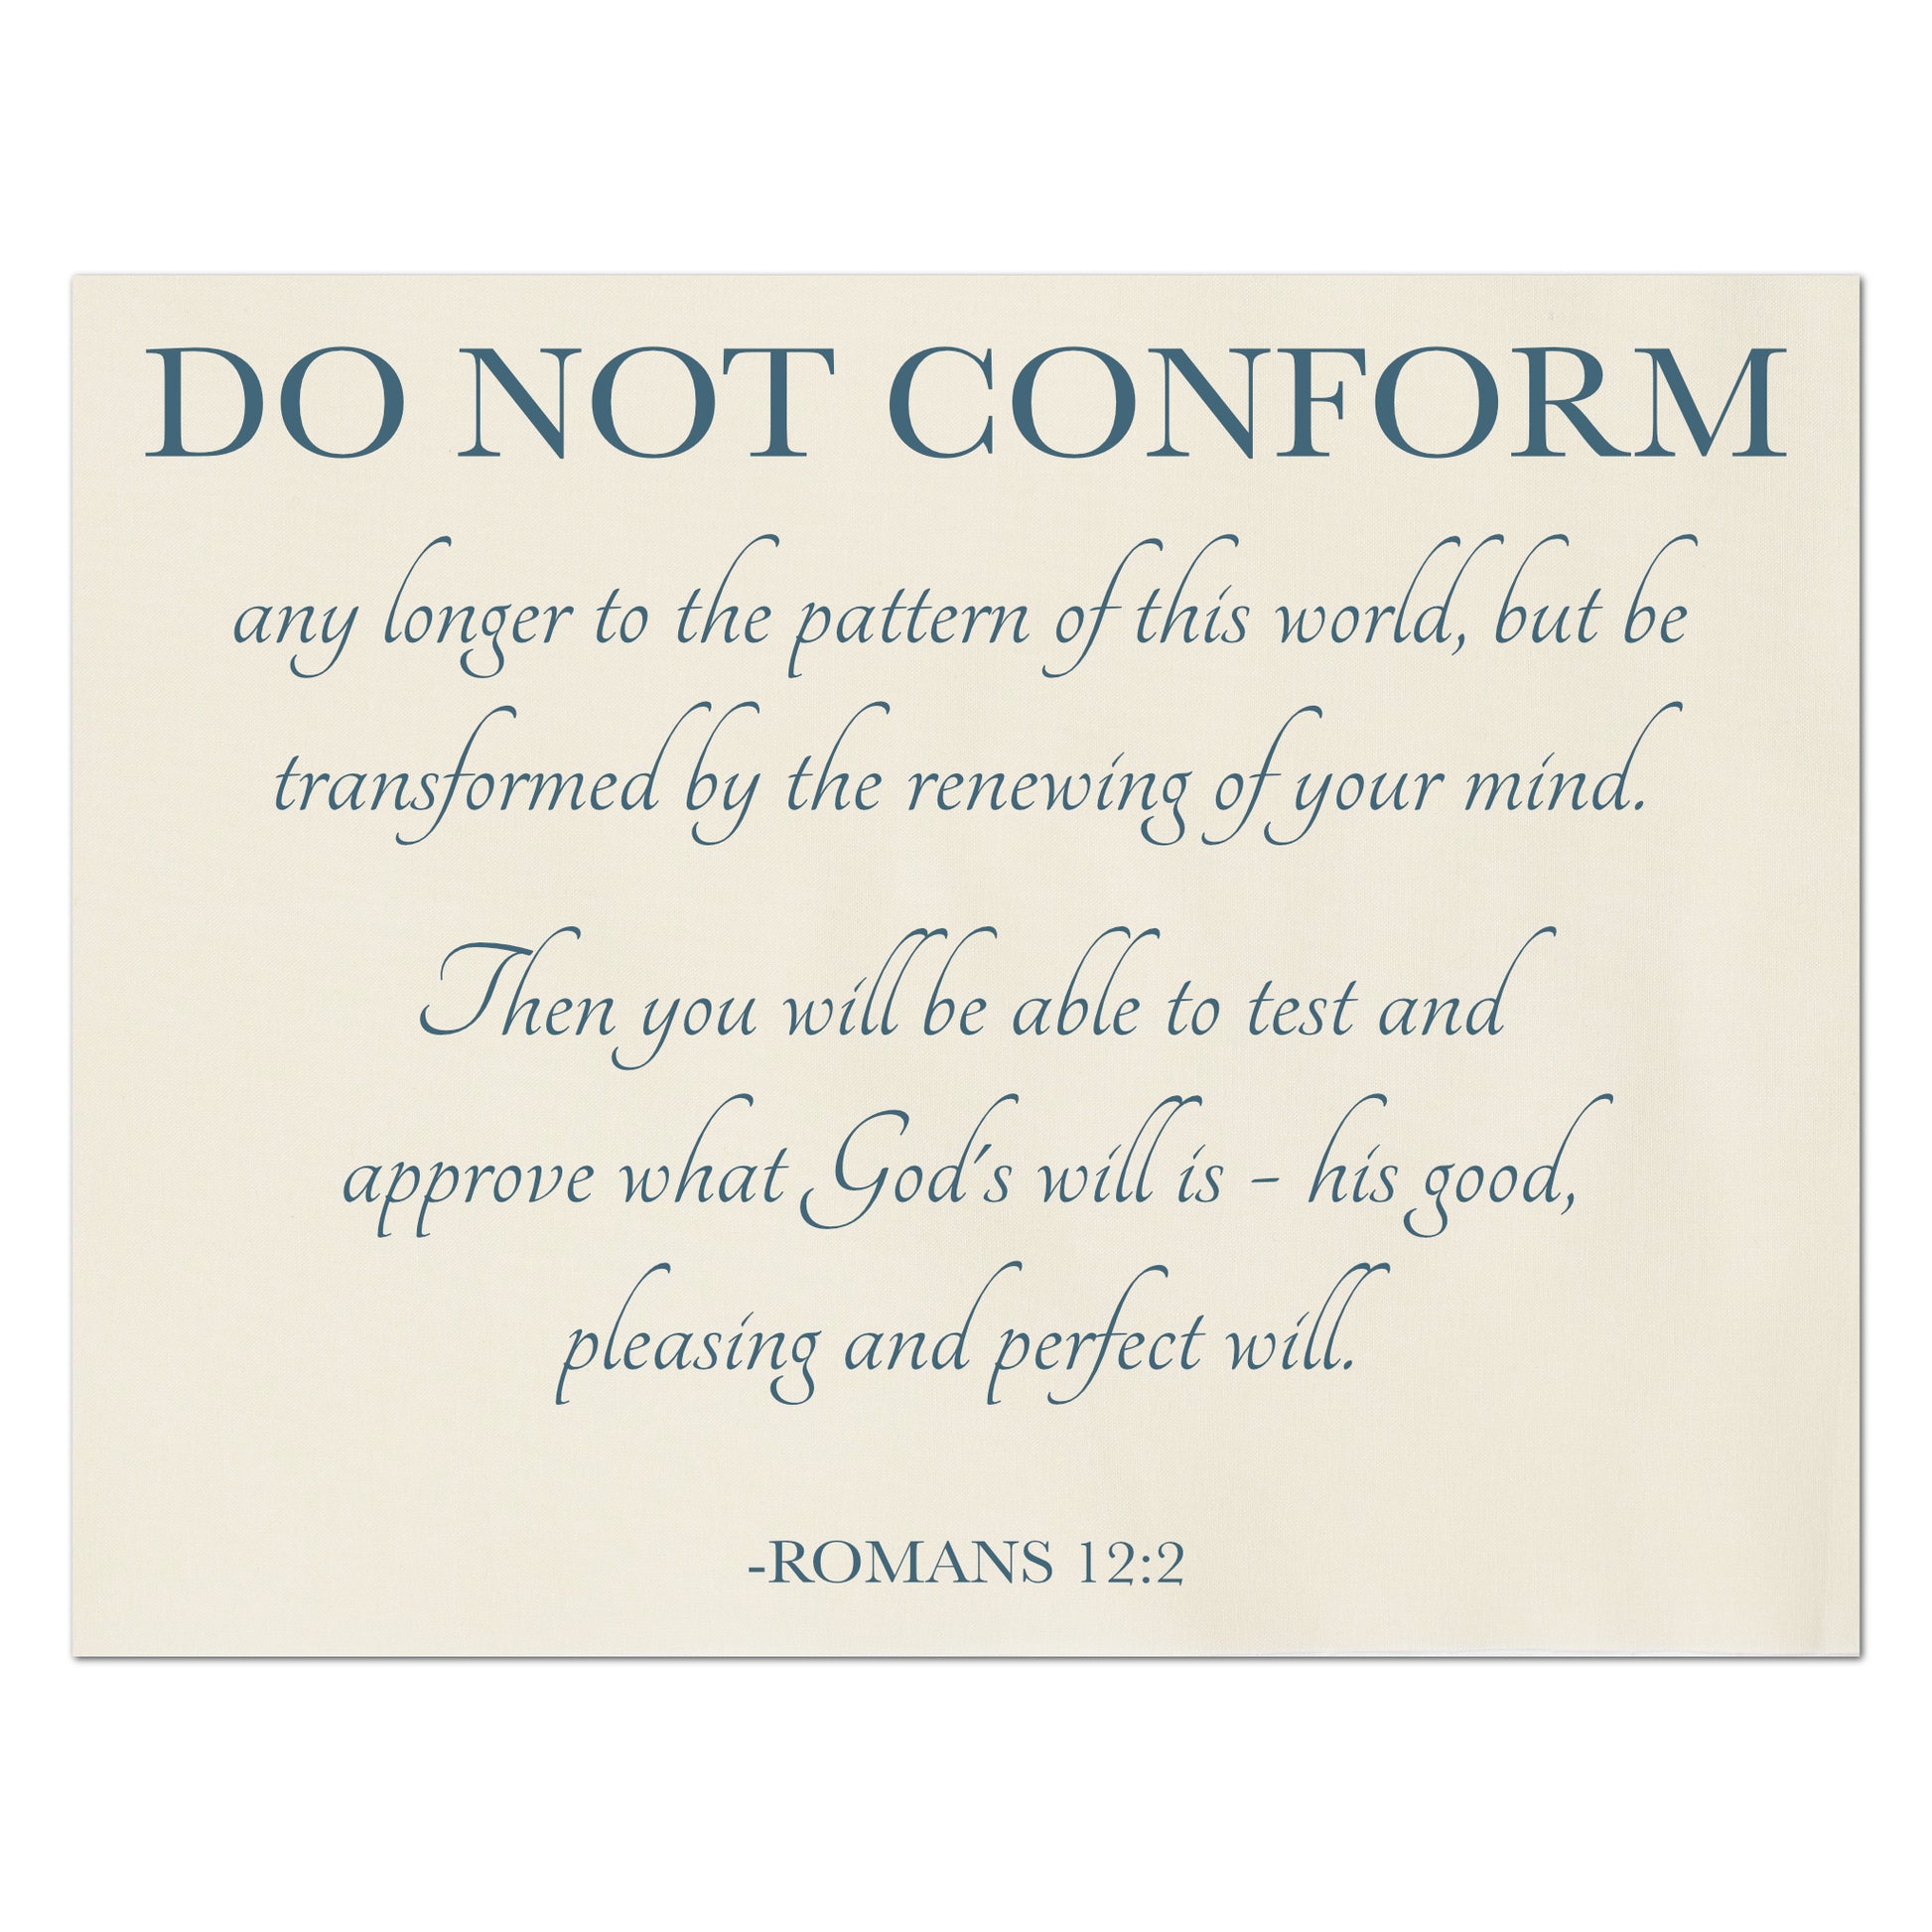 Romans 12 2 - Do Not Conform any longer to the pattern of this world, but be transformed by the renewing of your mind.  Then you will be able to test and approve what God's will is - his good, pleasing and perfect will.  Romans 12:2 - Fabric Panel Print, Quilt, Quilting, Sewing, Crafts